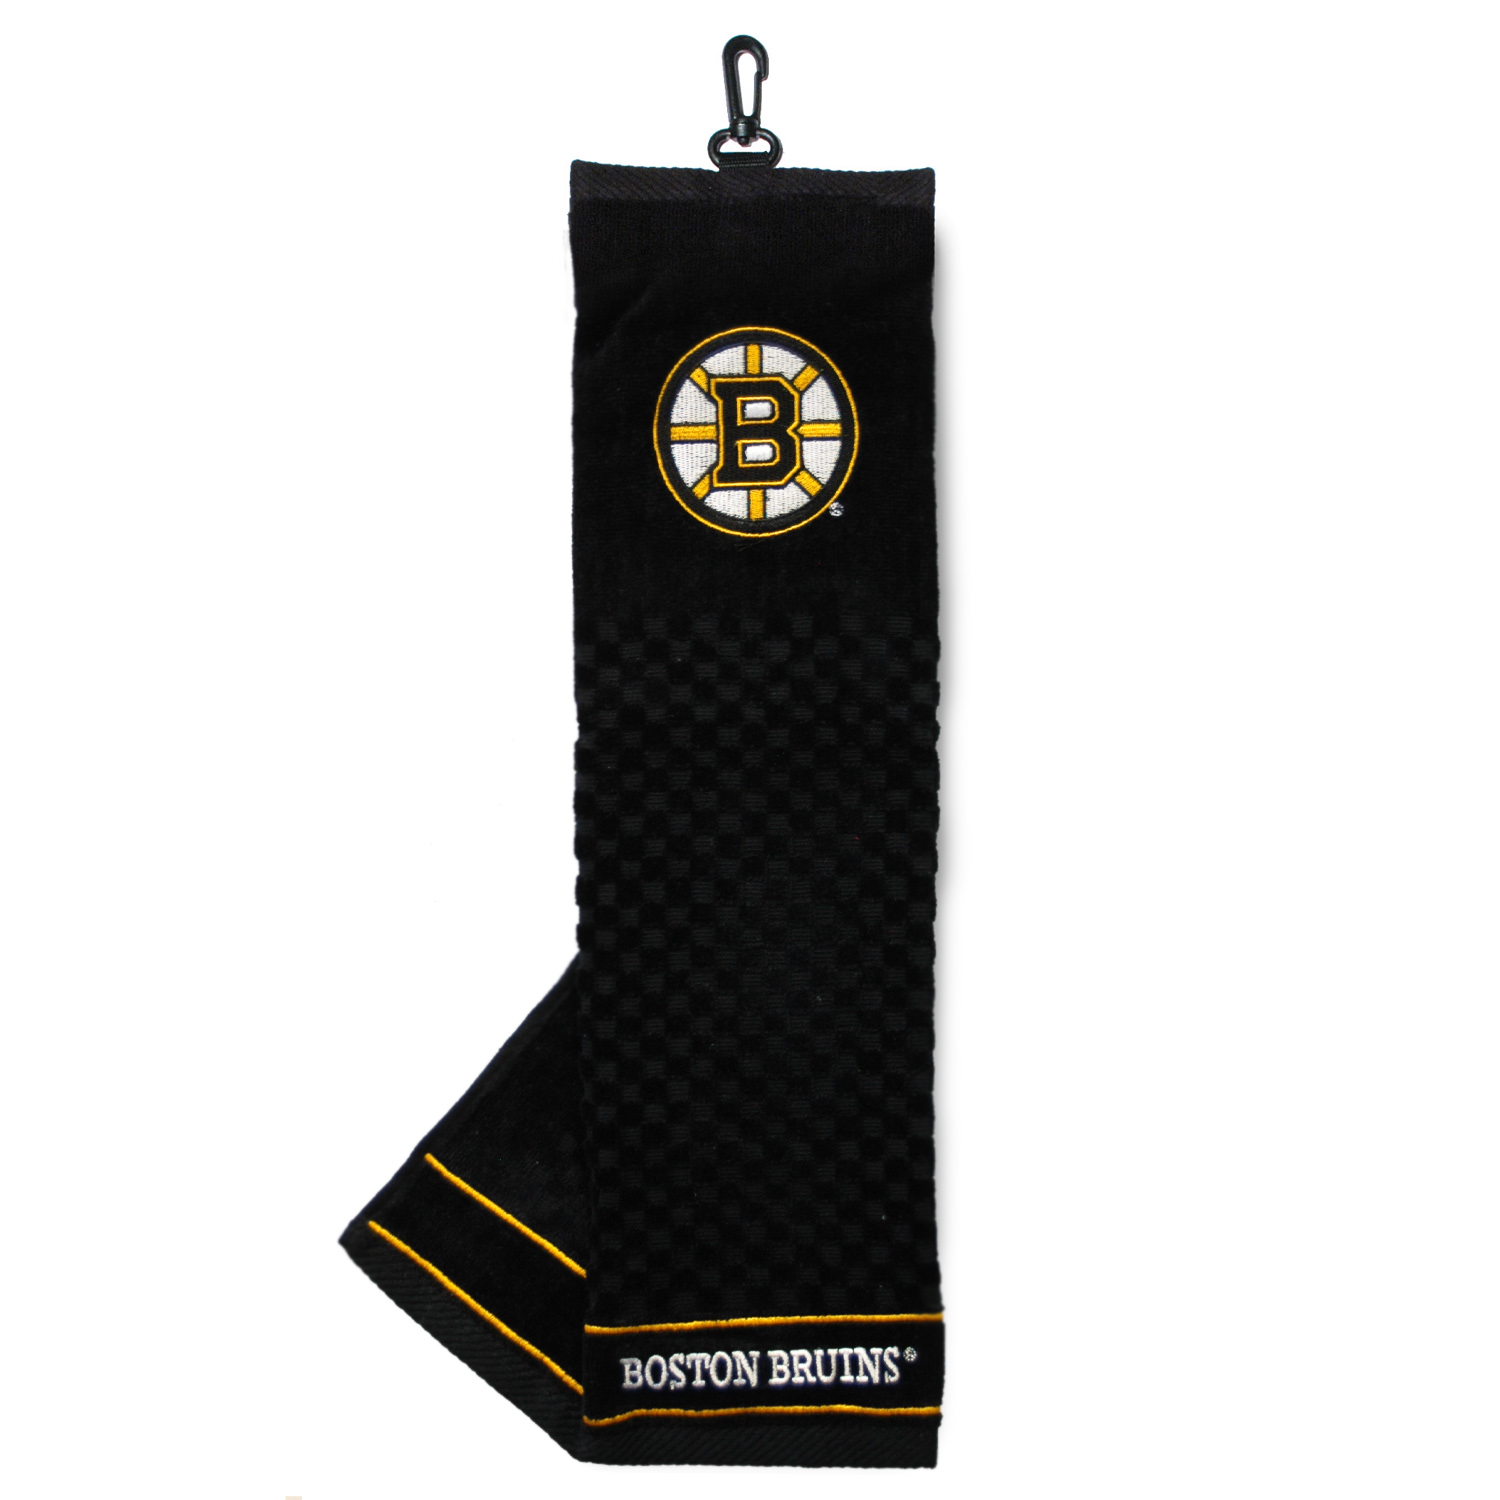 Boston Bruins Embroidered Towel